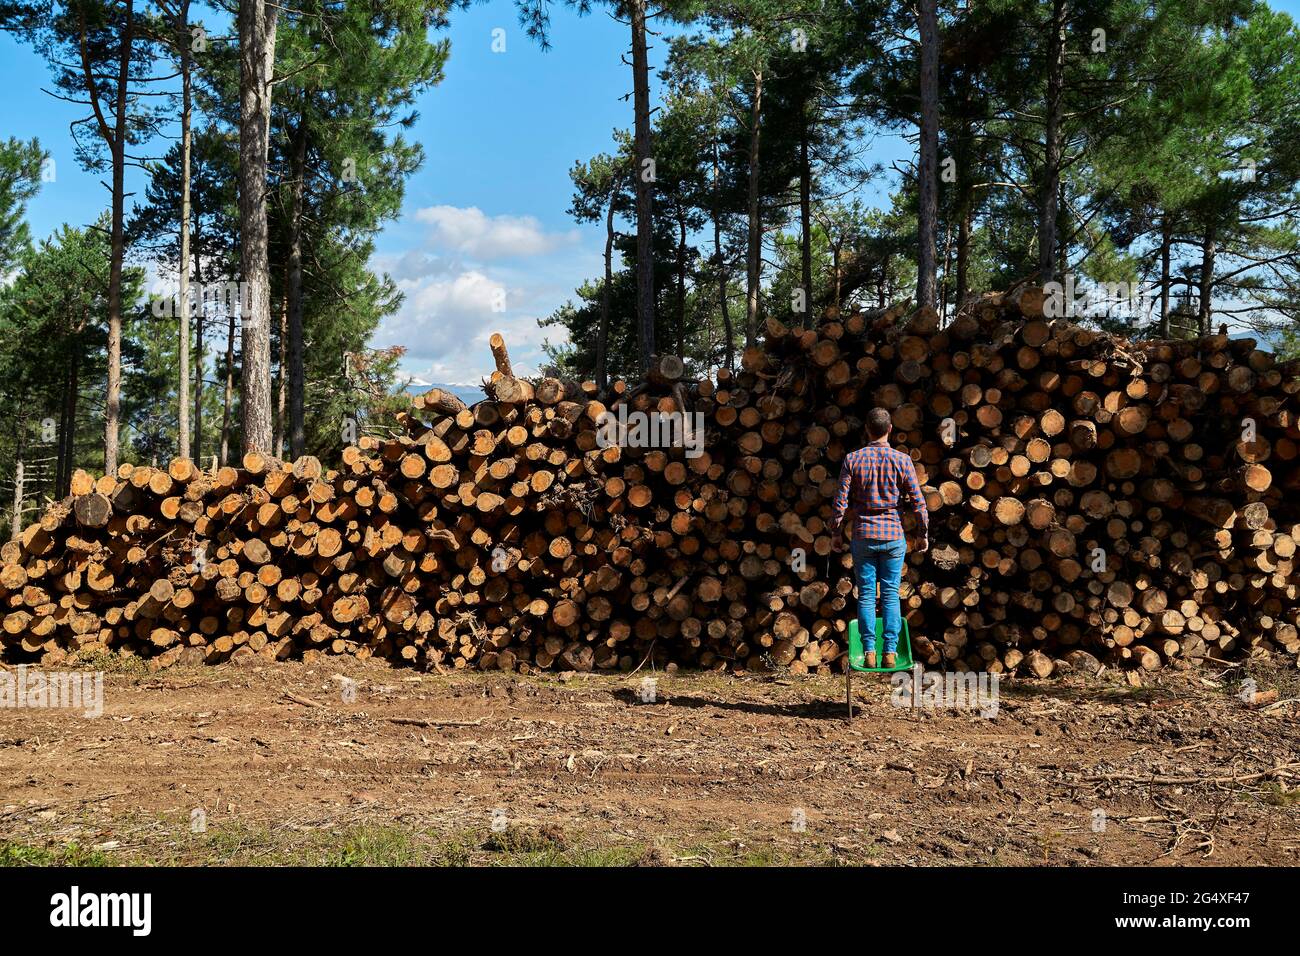 Man standing on chair at lumber industry Stock Photo